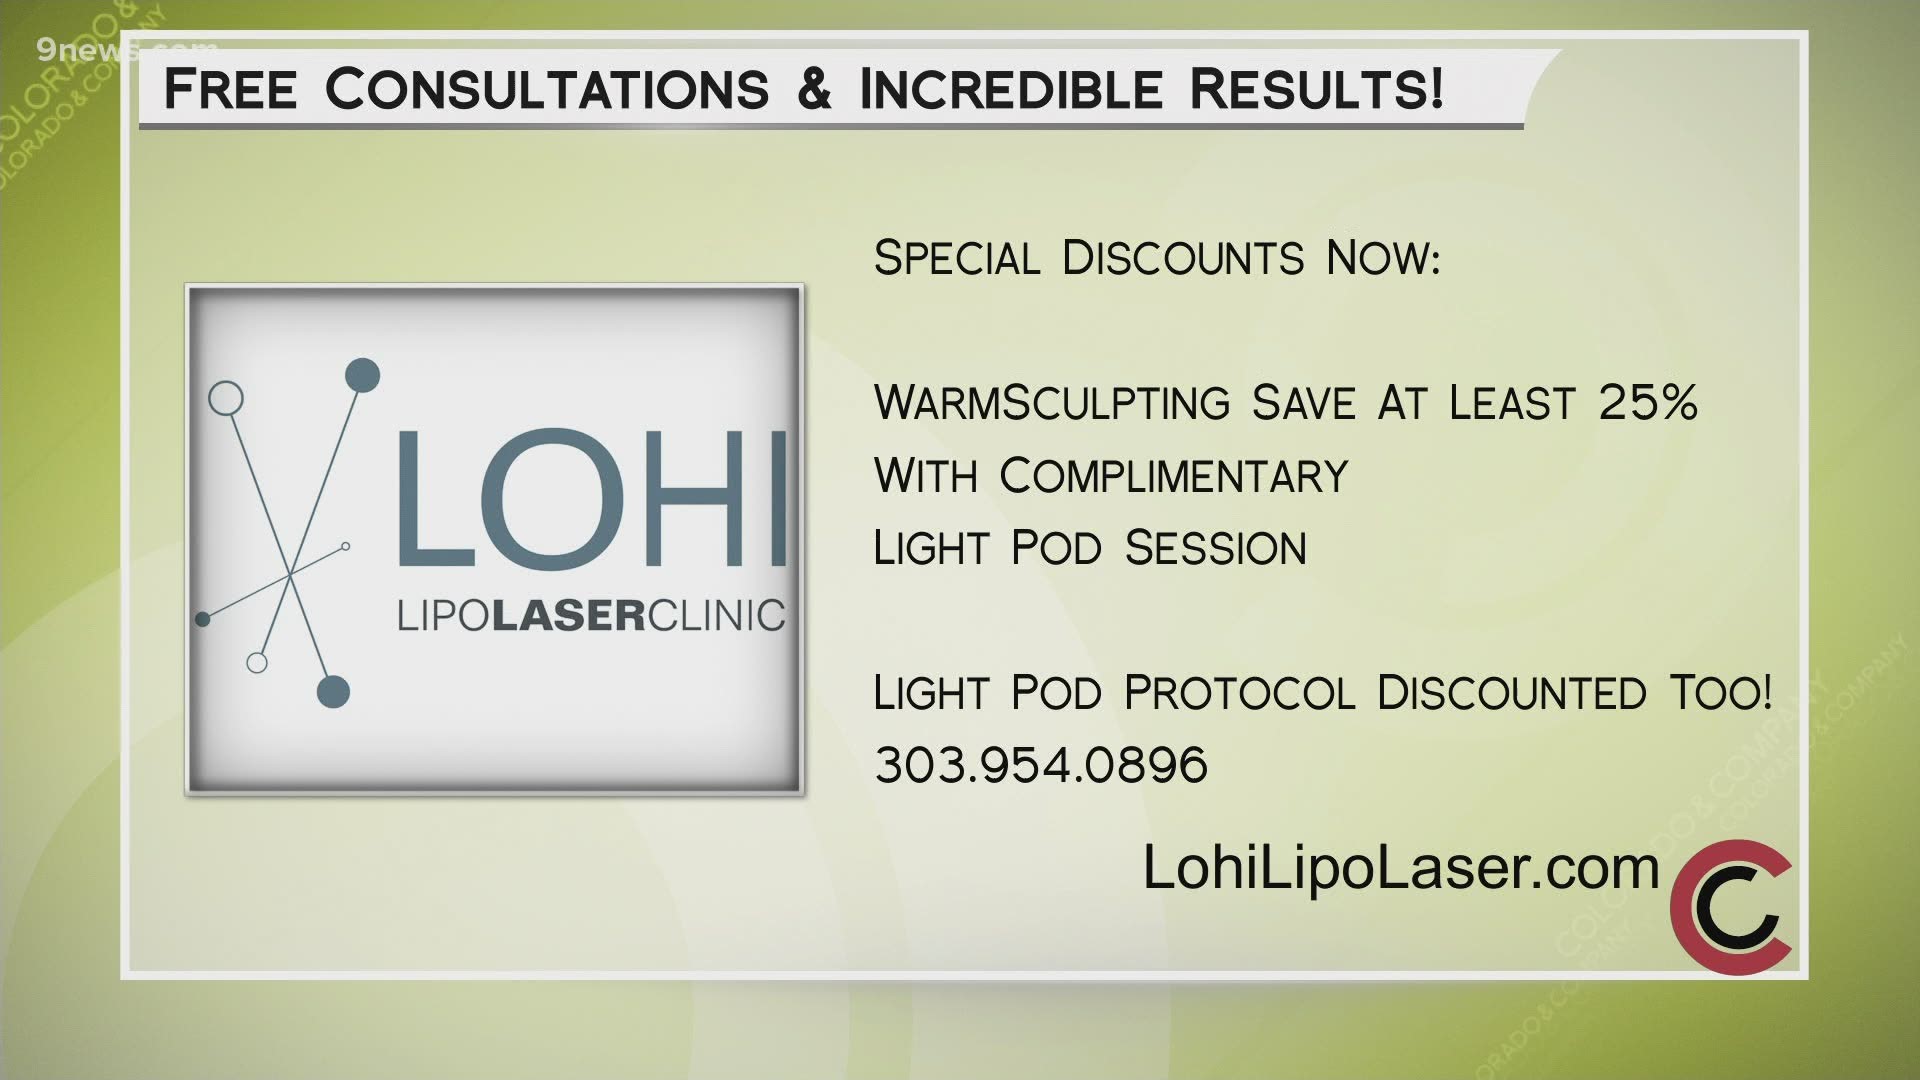 Get 25% or more off of Warmsculpting, as well as deep discounts on the Light Pod. Call 303.954.0896 or visit LohiLipoLaser.com to get started.